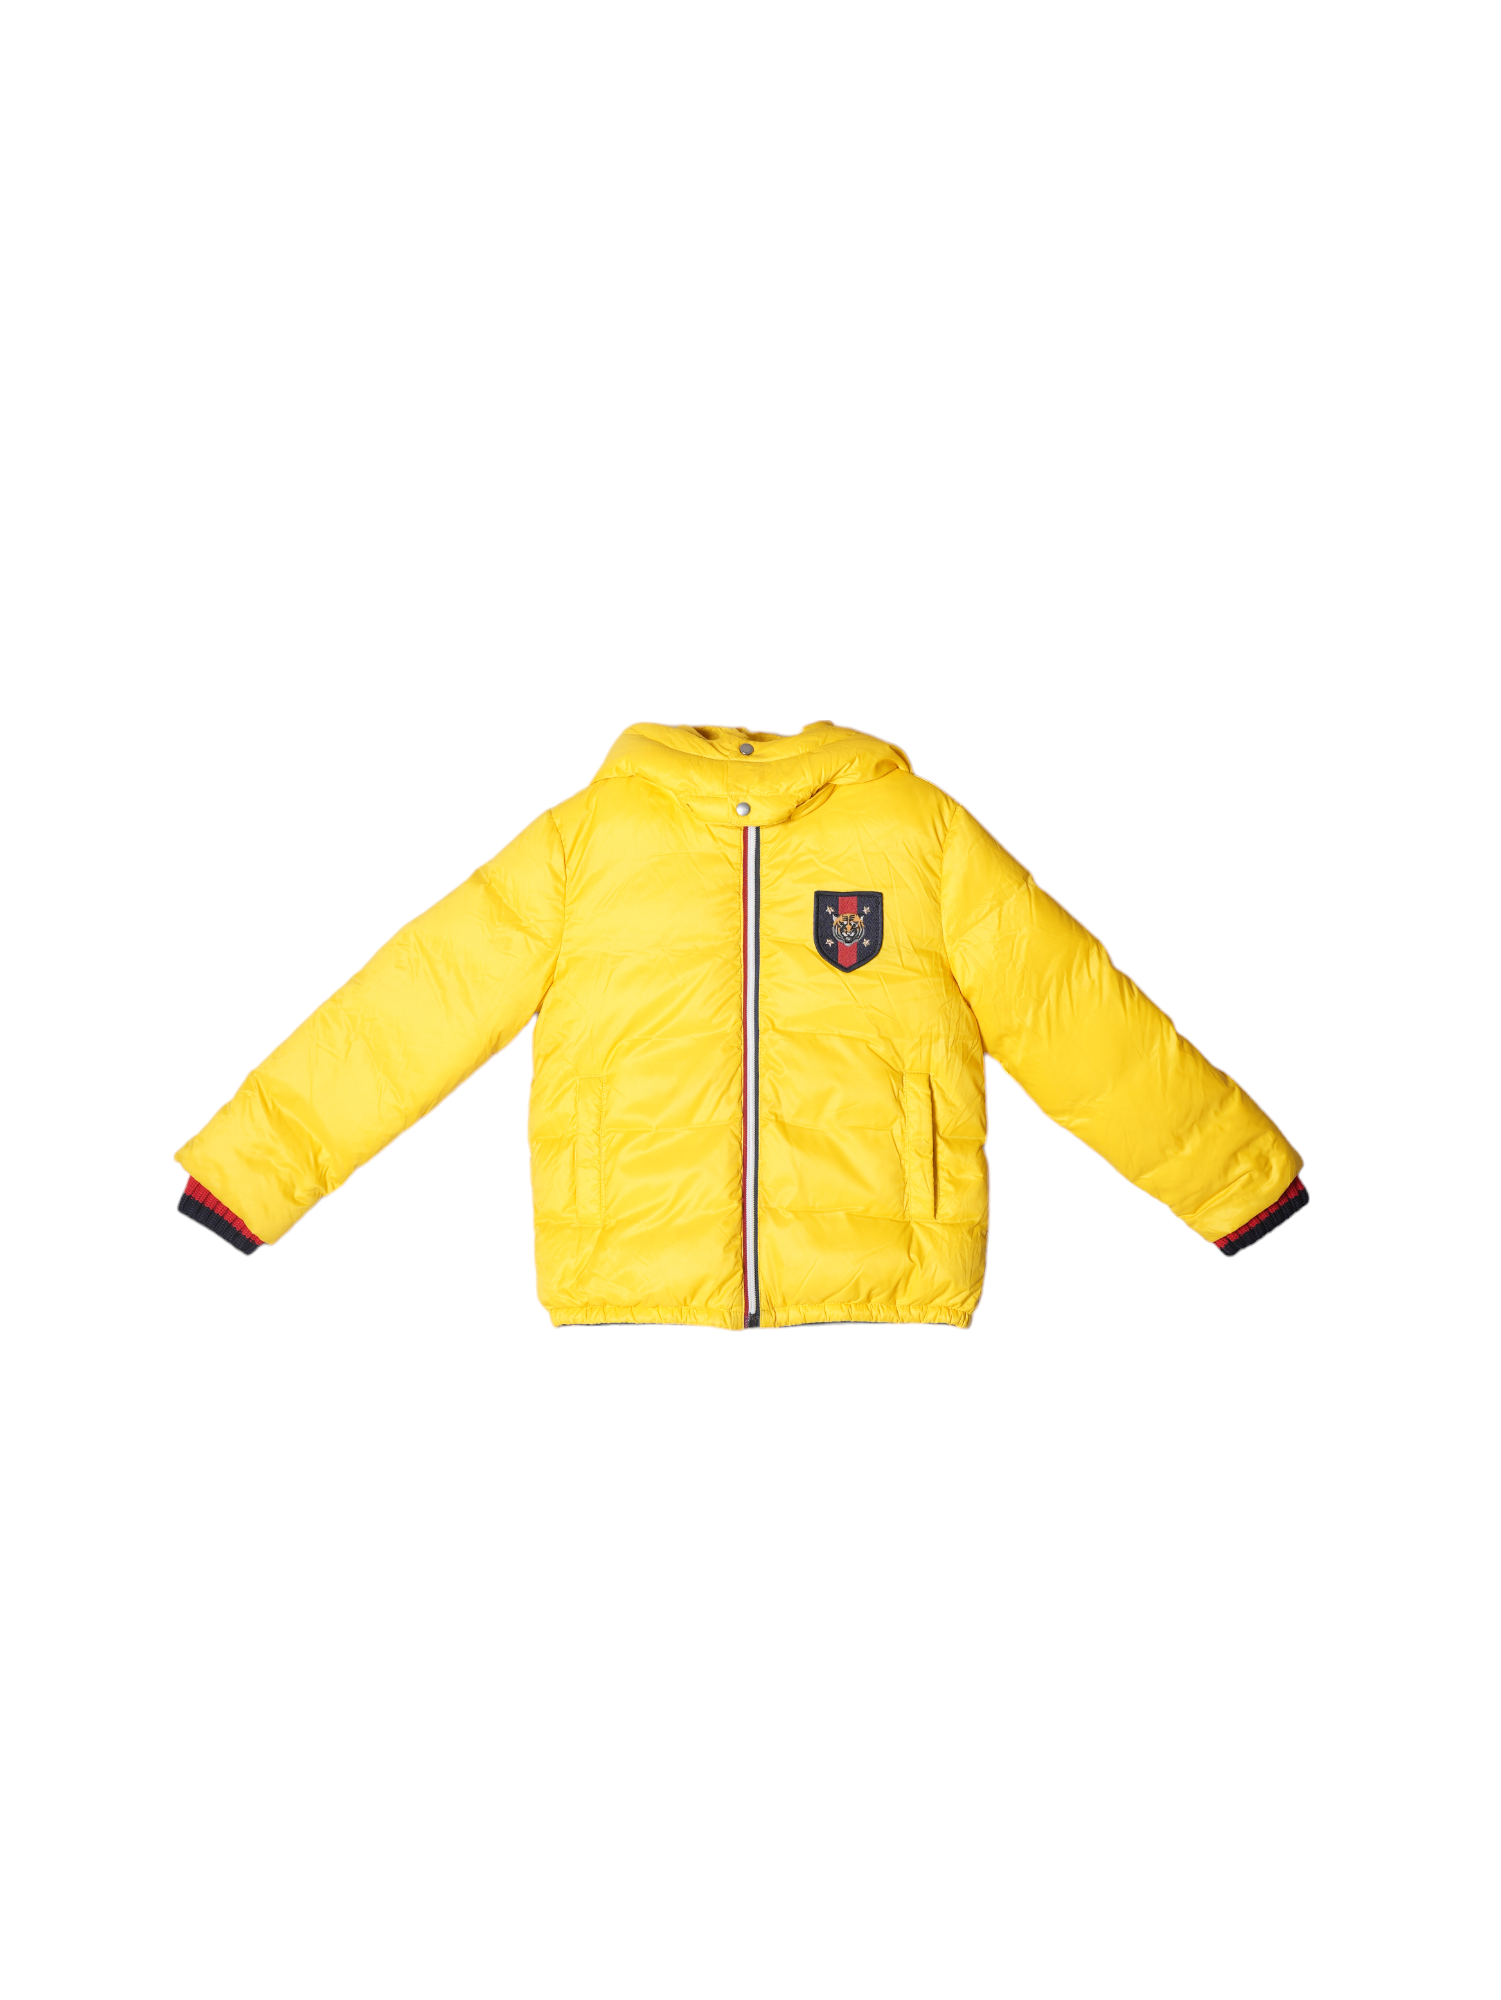 Gucci Boys Yellow Jacket With Embroidary Tiger Patch